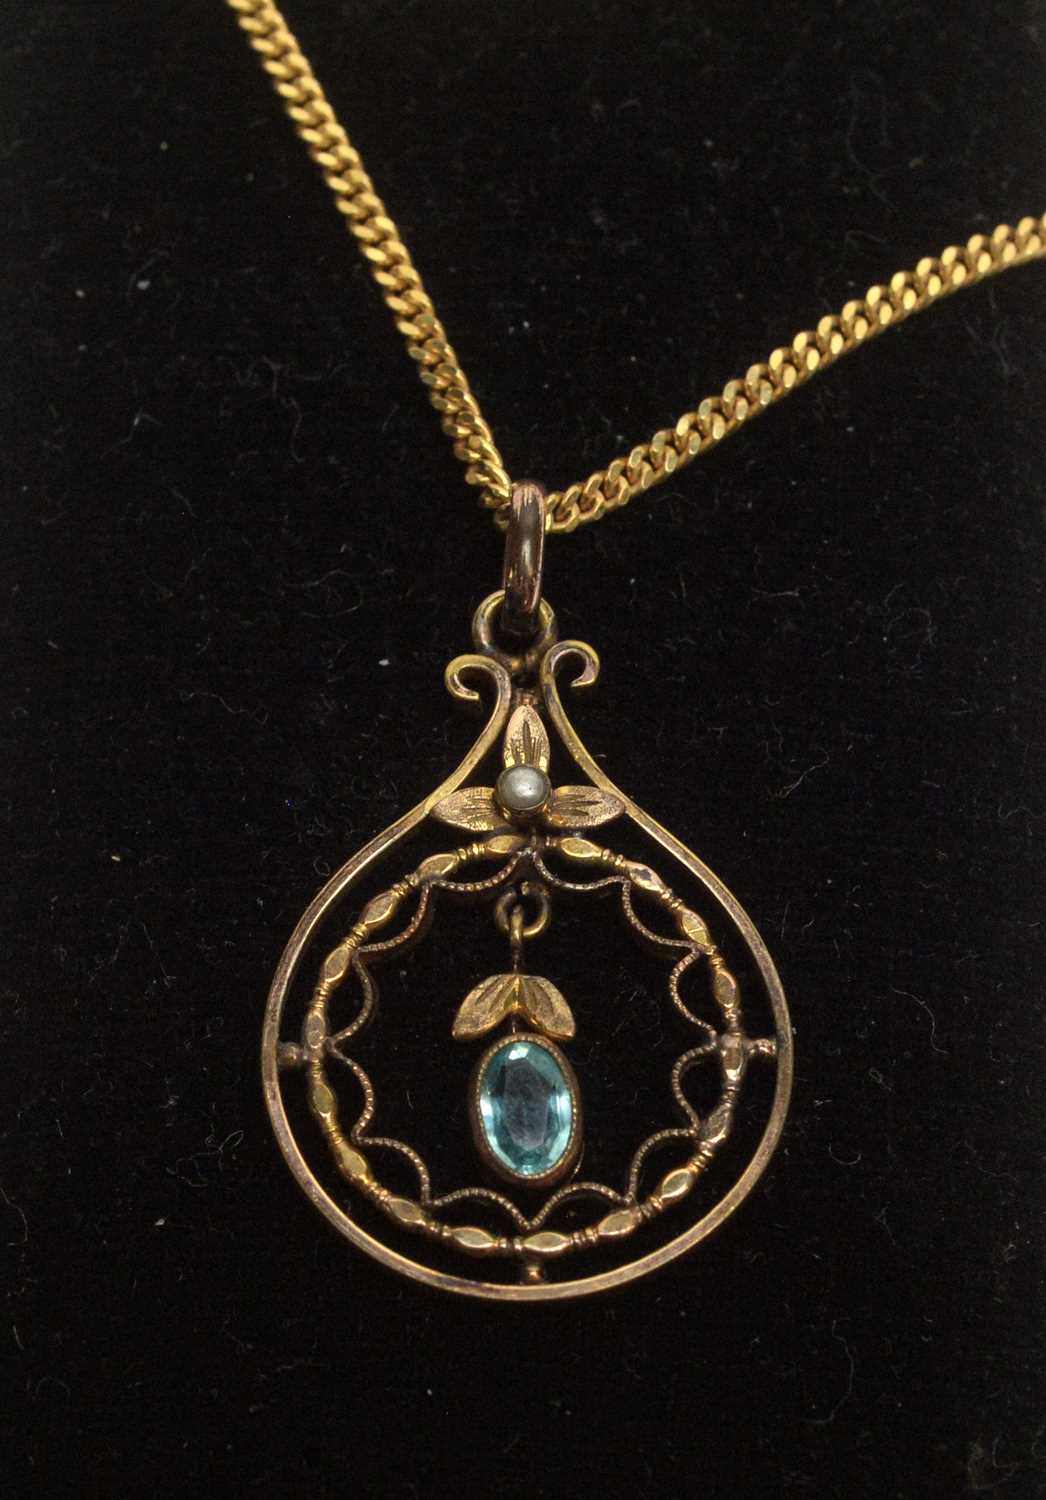 Lot 127 - An Edwardian pendant on gold chain.